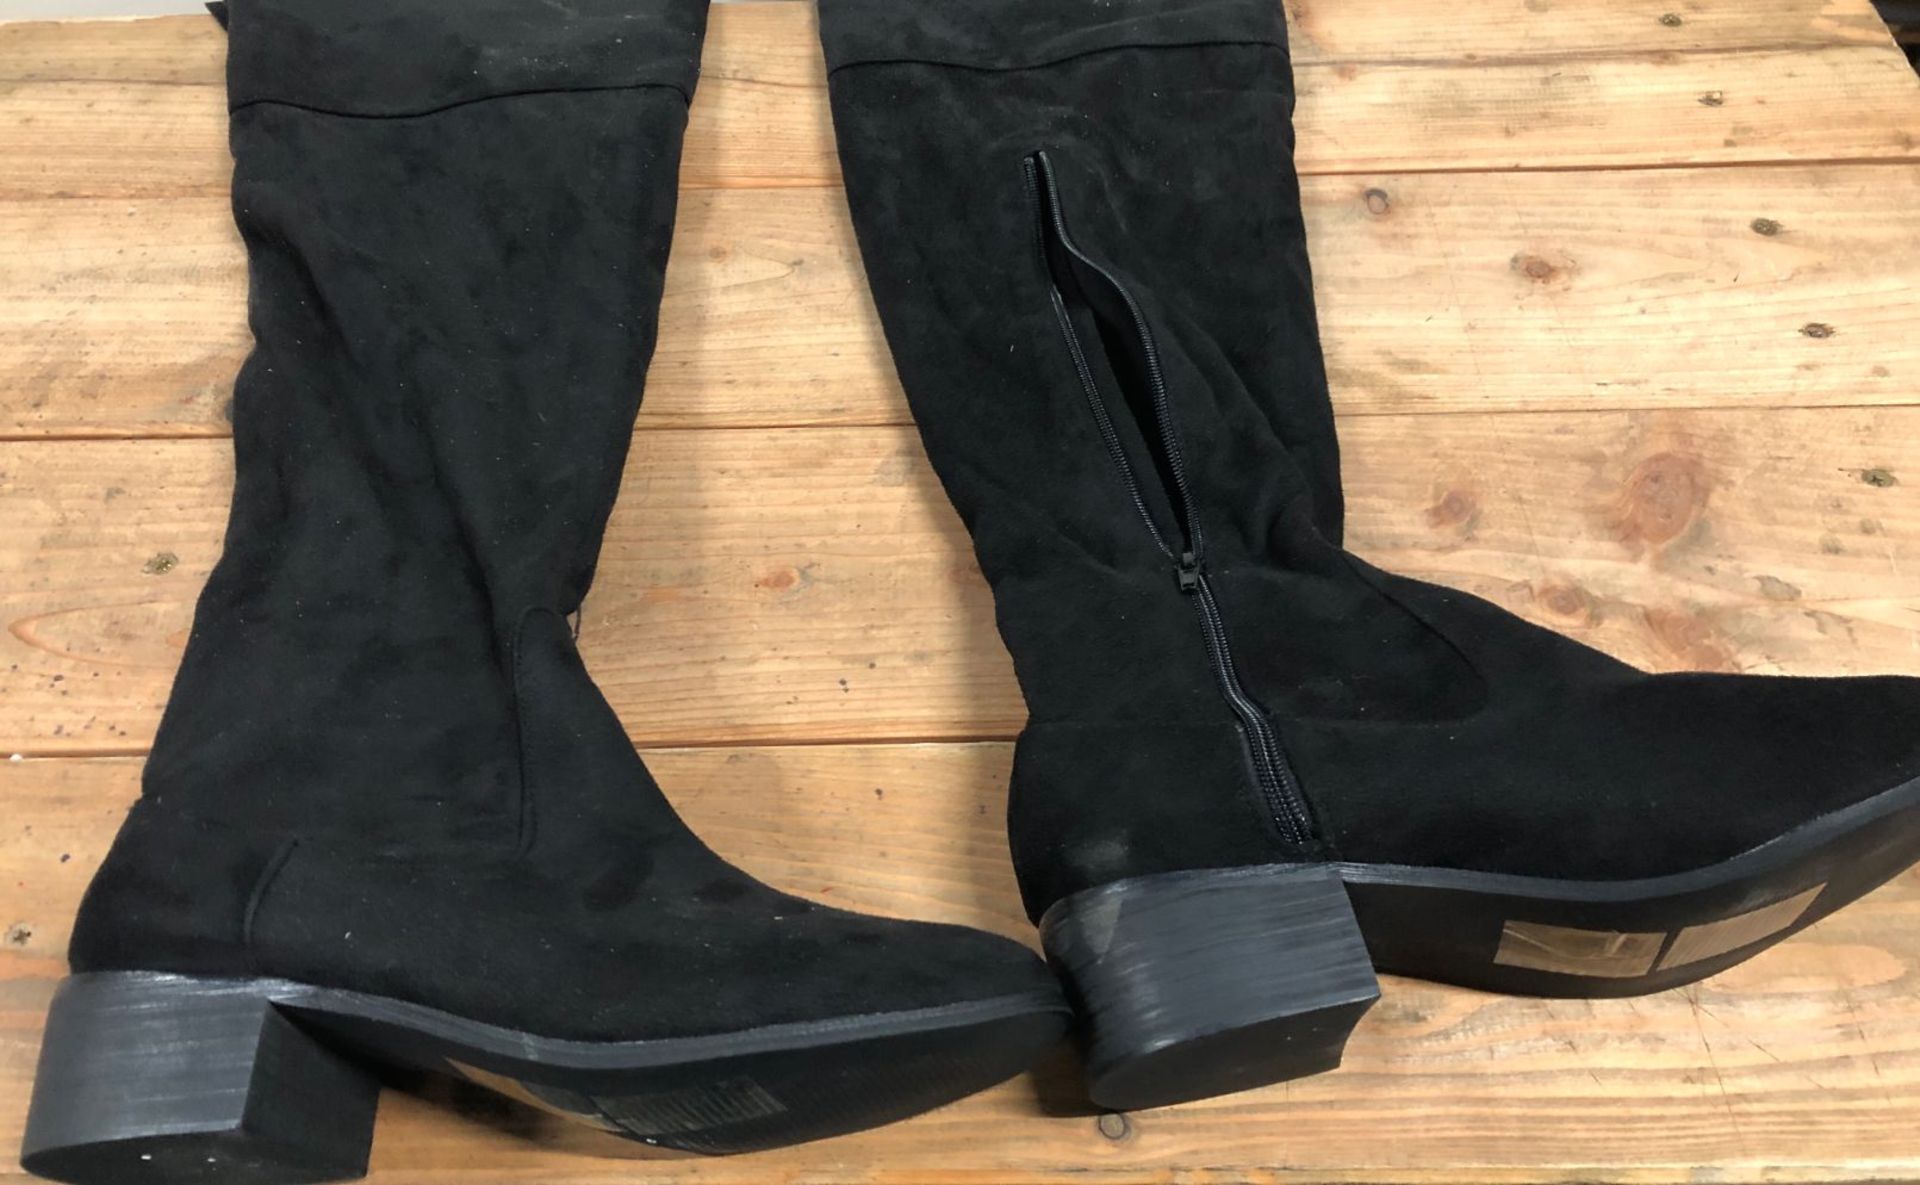 1 X PAIR OF LA REDOUTE COLLECTIONS OVER THE KNEE BOOTS / SIZE: 7.25 UK / RRP £80.00